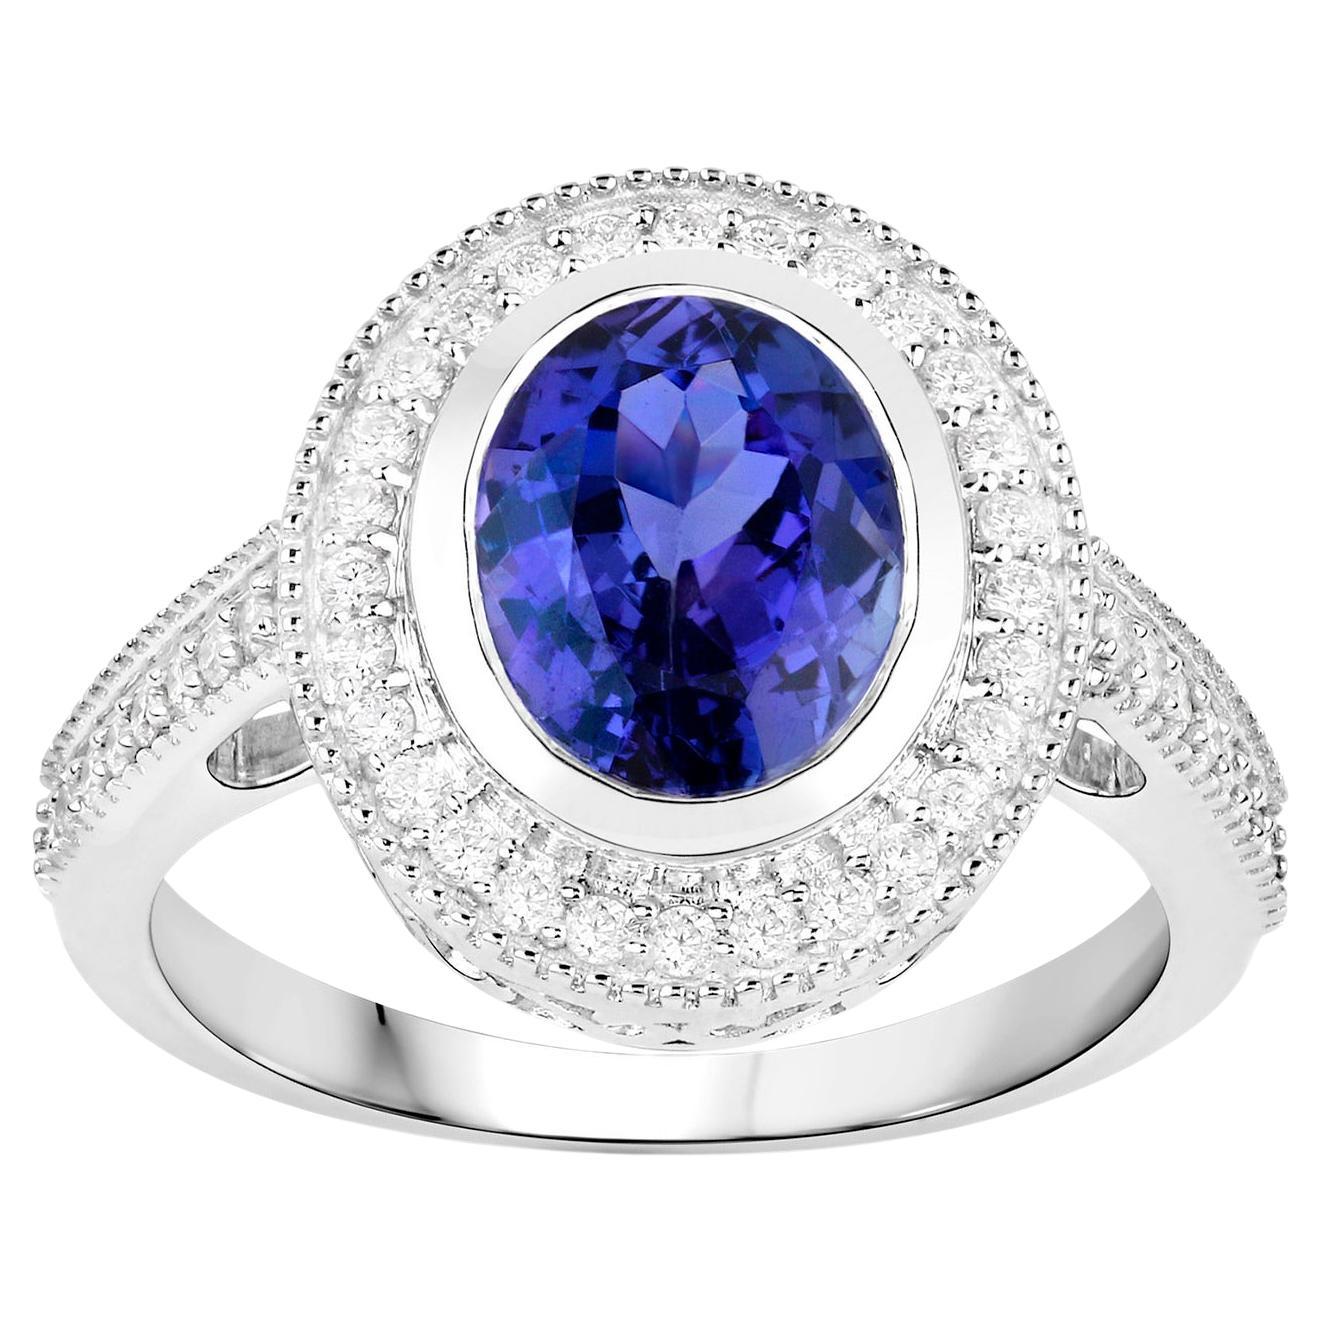 Tanzanite Ring With Diamonds 2.94 Carats 14K White Gold For Sale